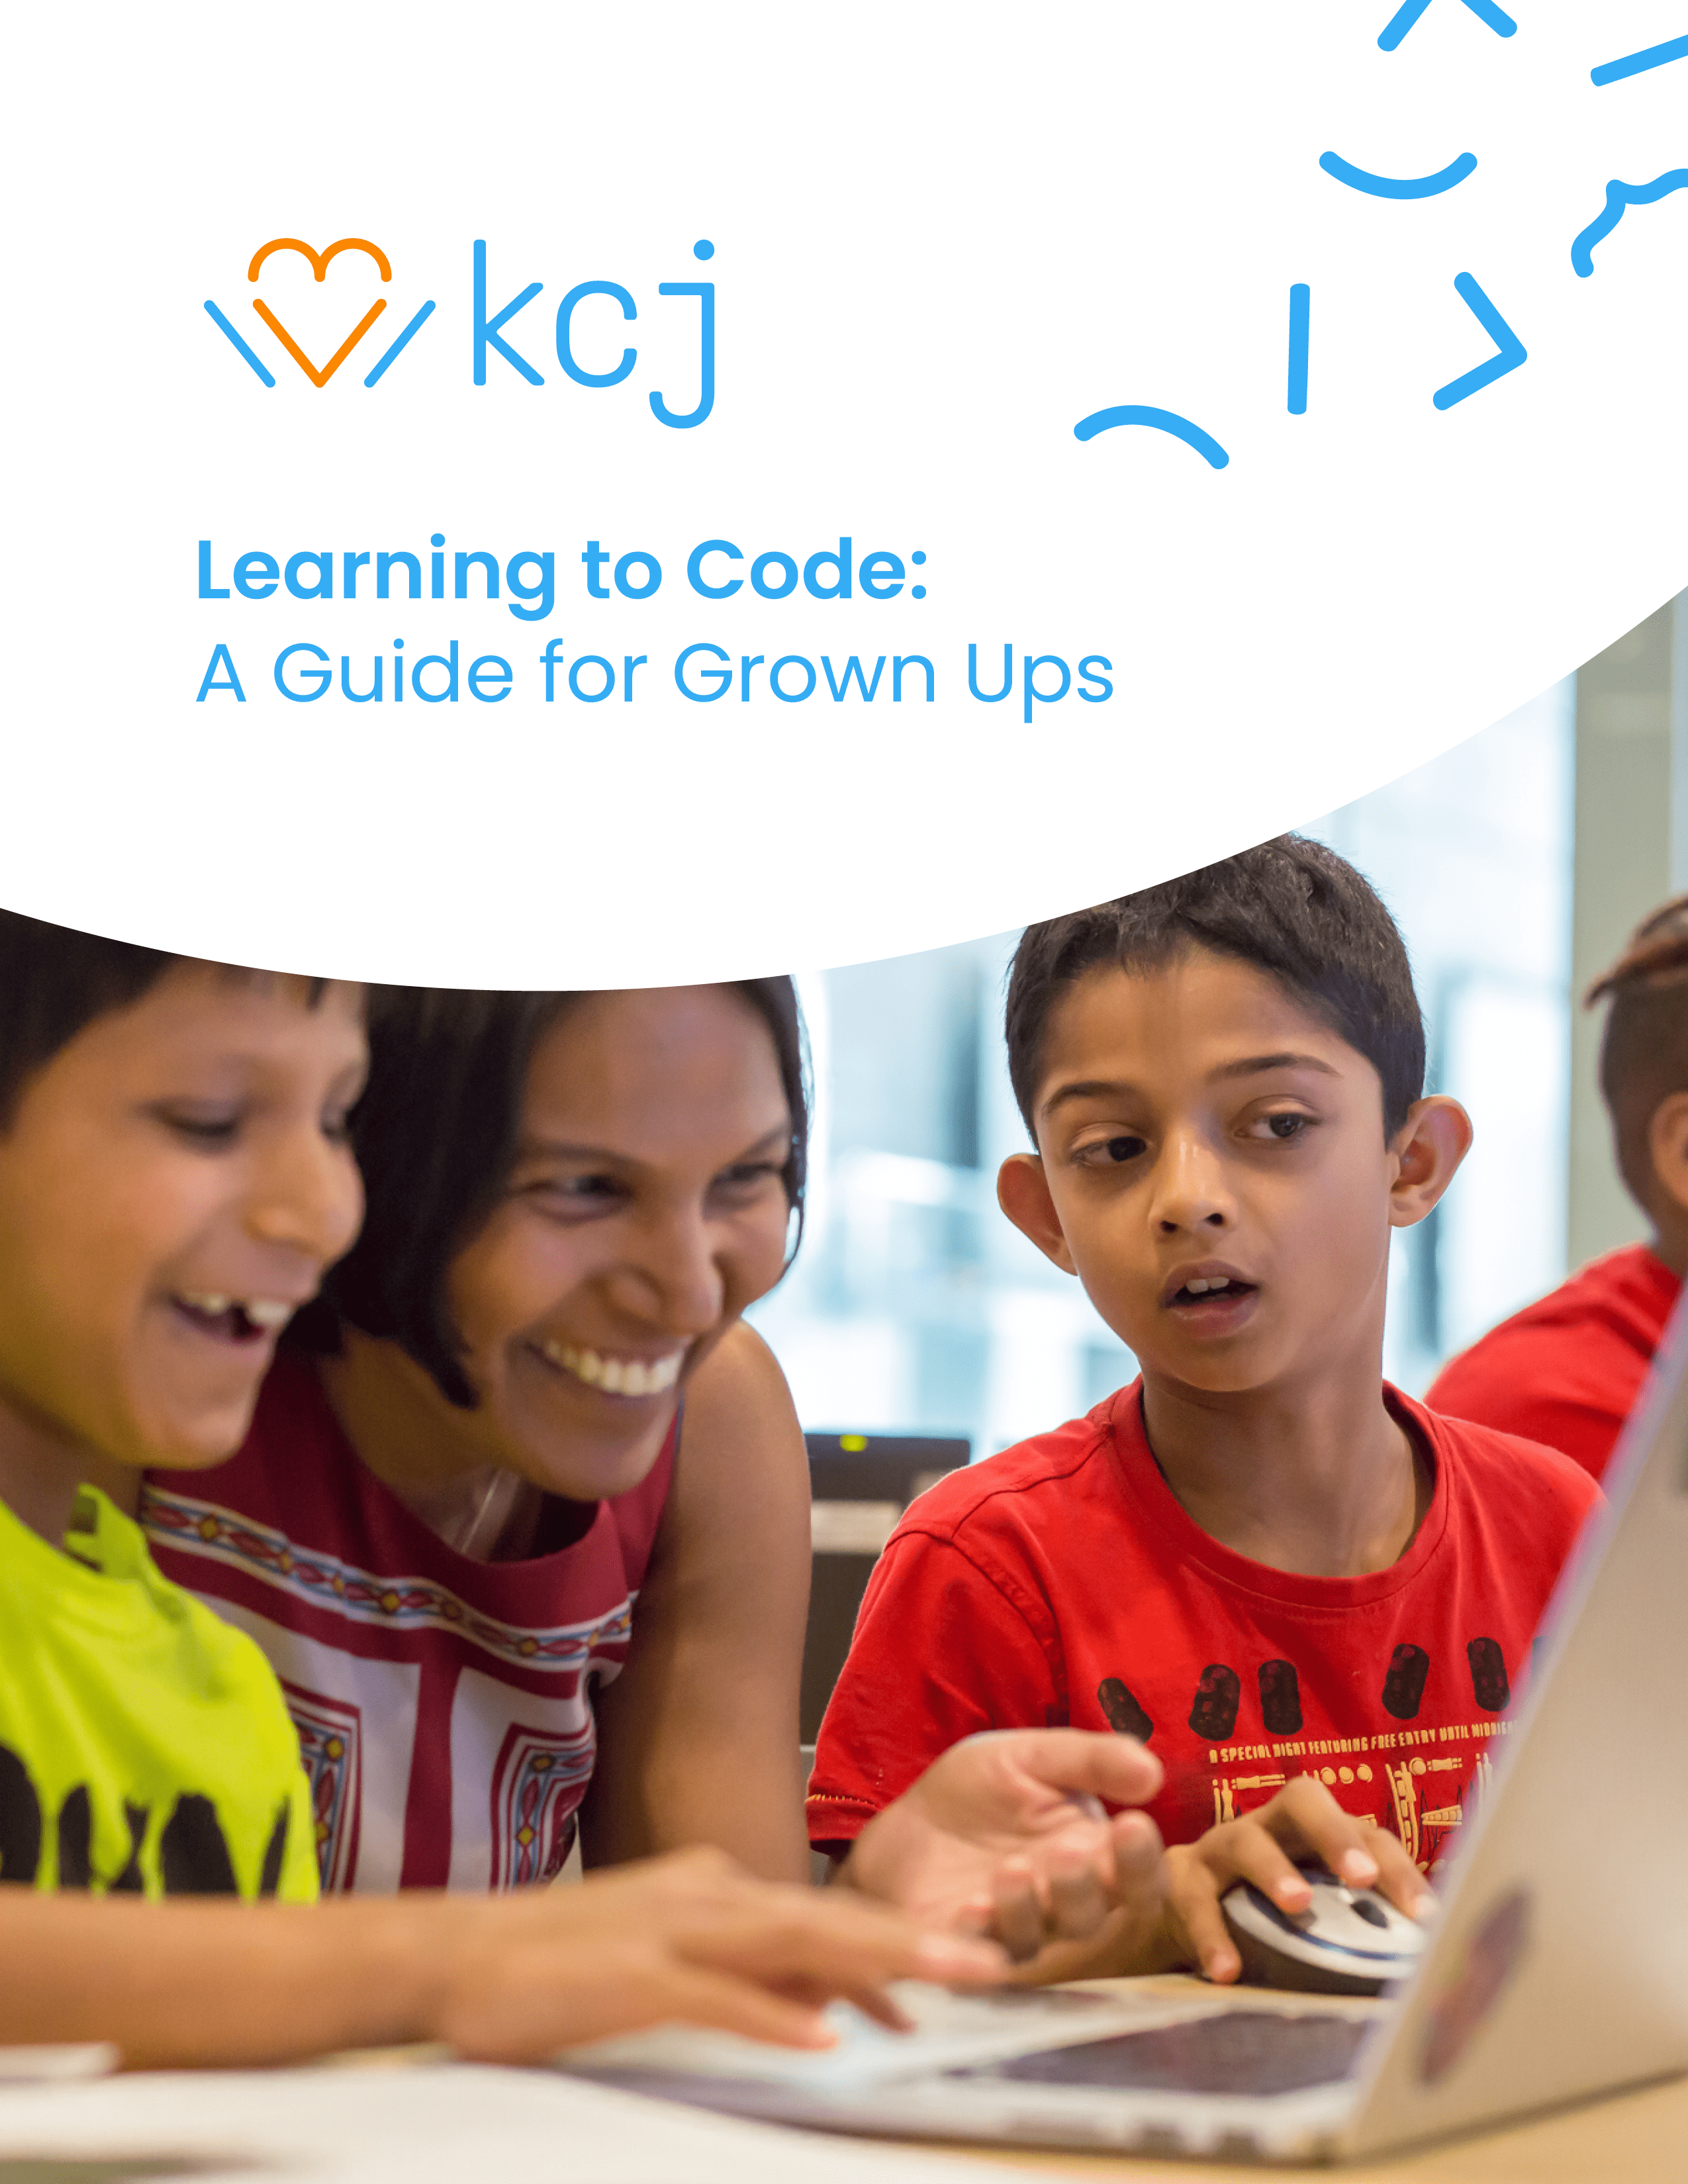 Thumbnail of Learning to Code: a guide for grown ups in PDF format